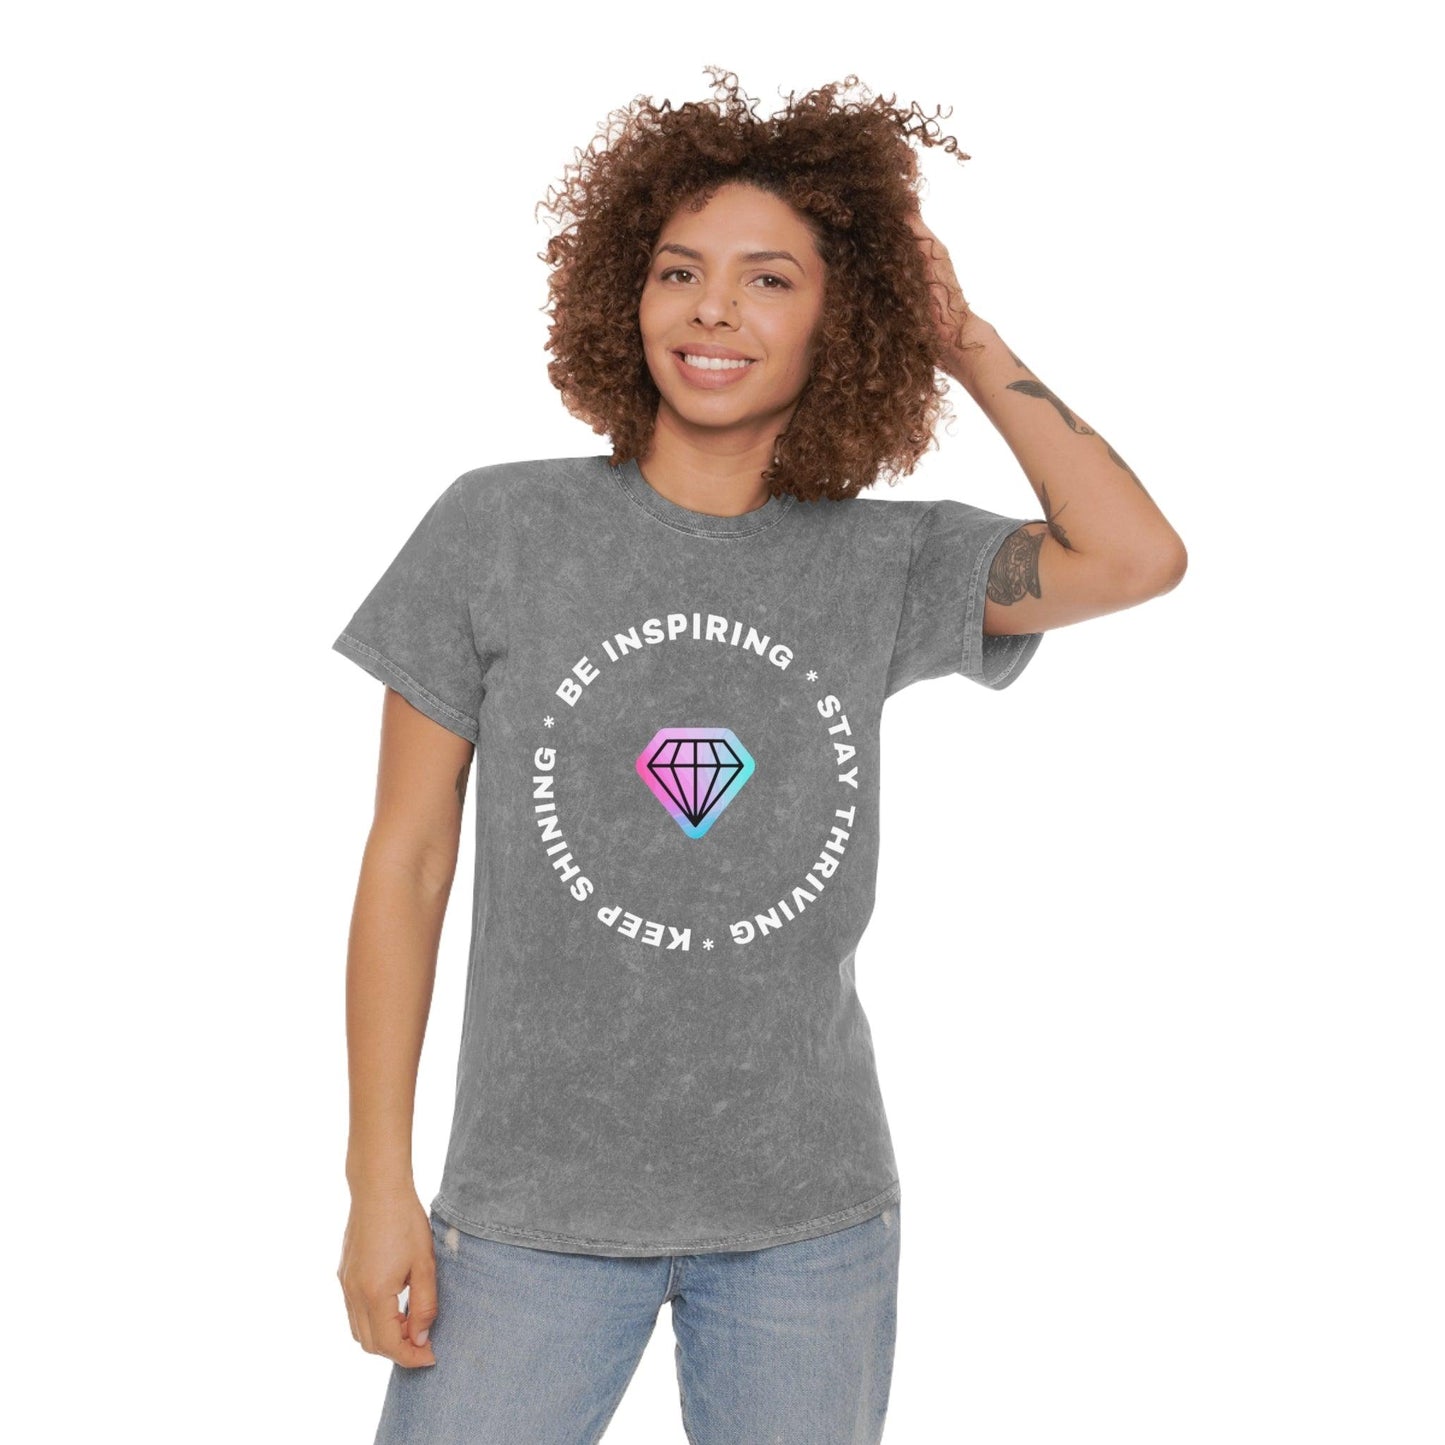 Be Inspiring Mineral Wash Tee